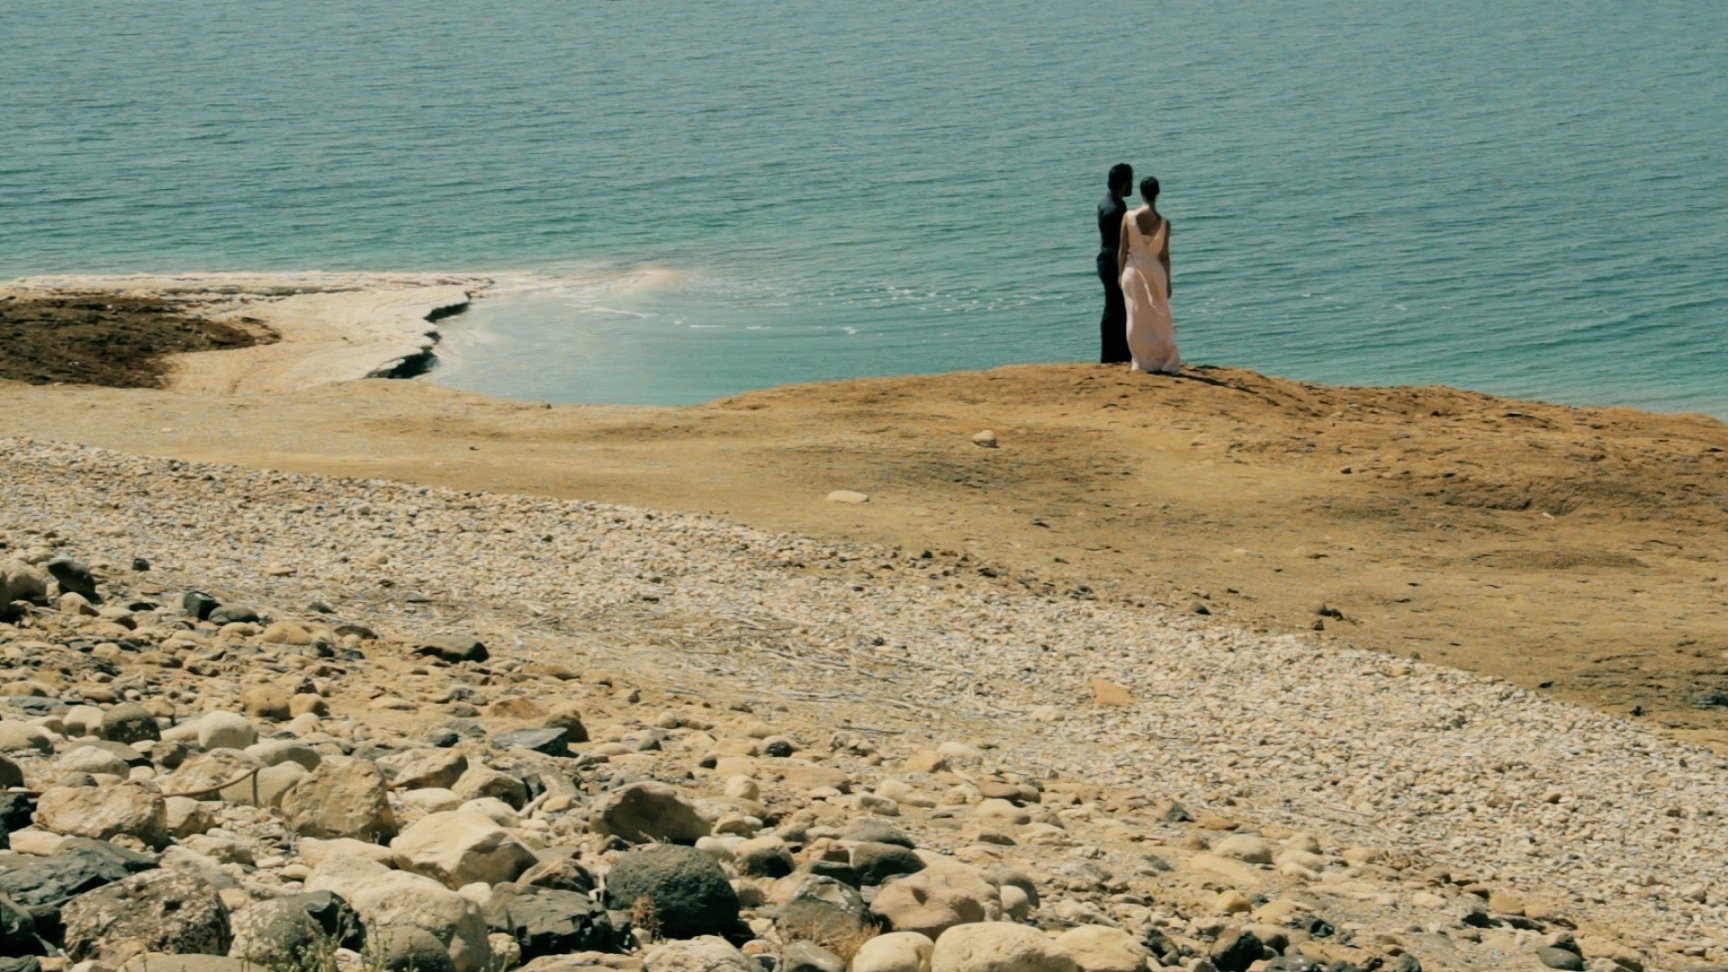 When Times Becomes a Woman (2012) - an SF film about two people standing on a beach (the shores of the Dead Sea) and talking